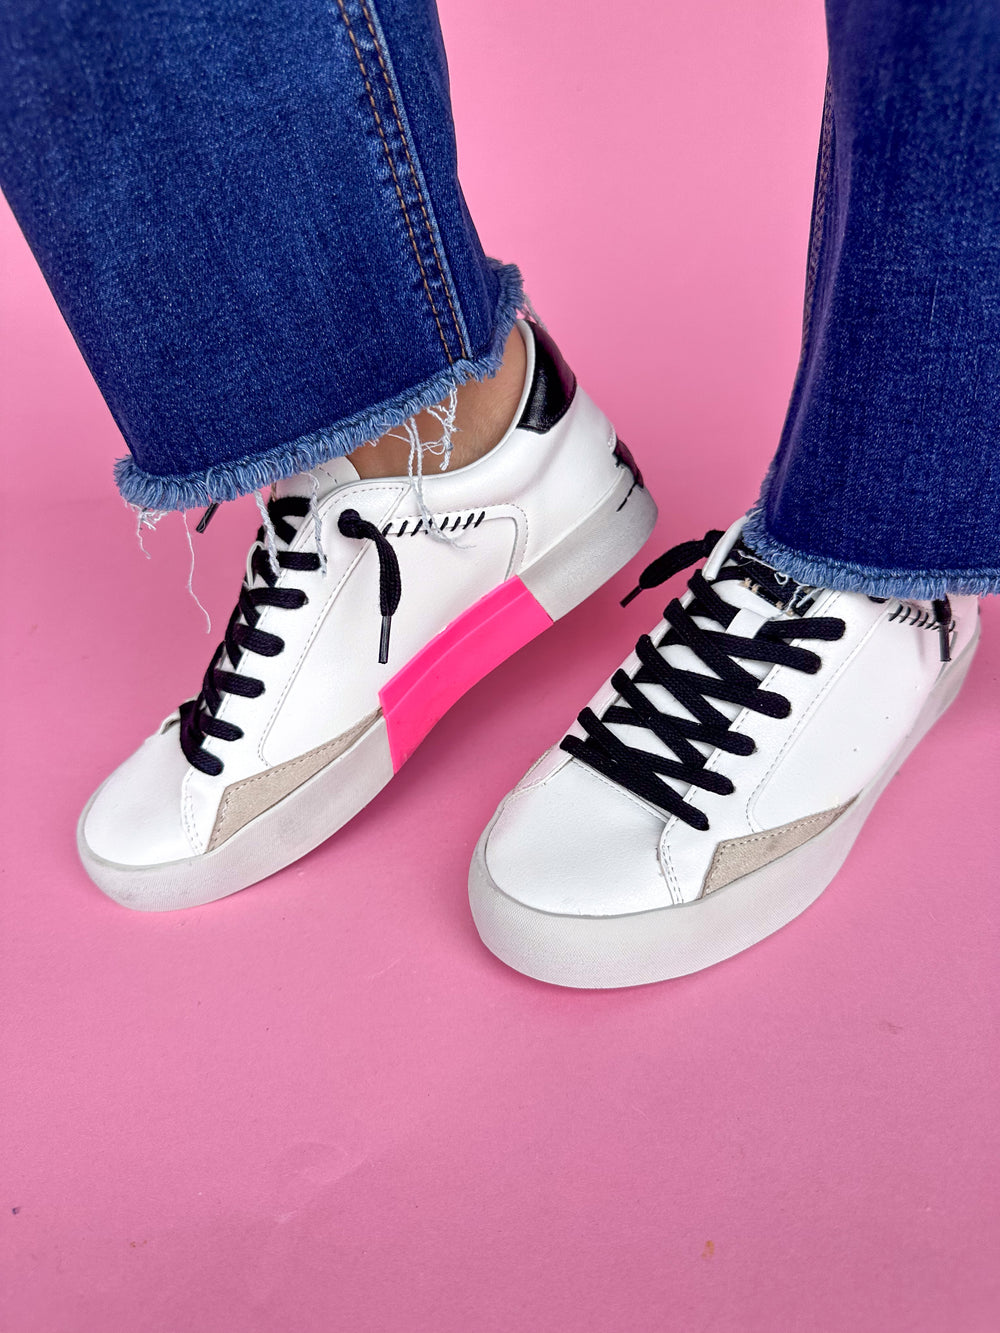 ShuShop | Ruby Sneakers - Black And White